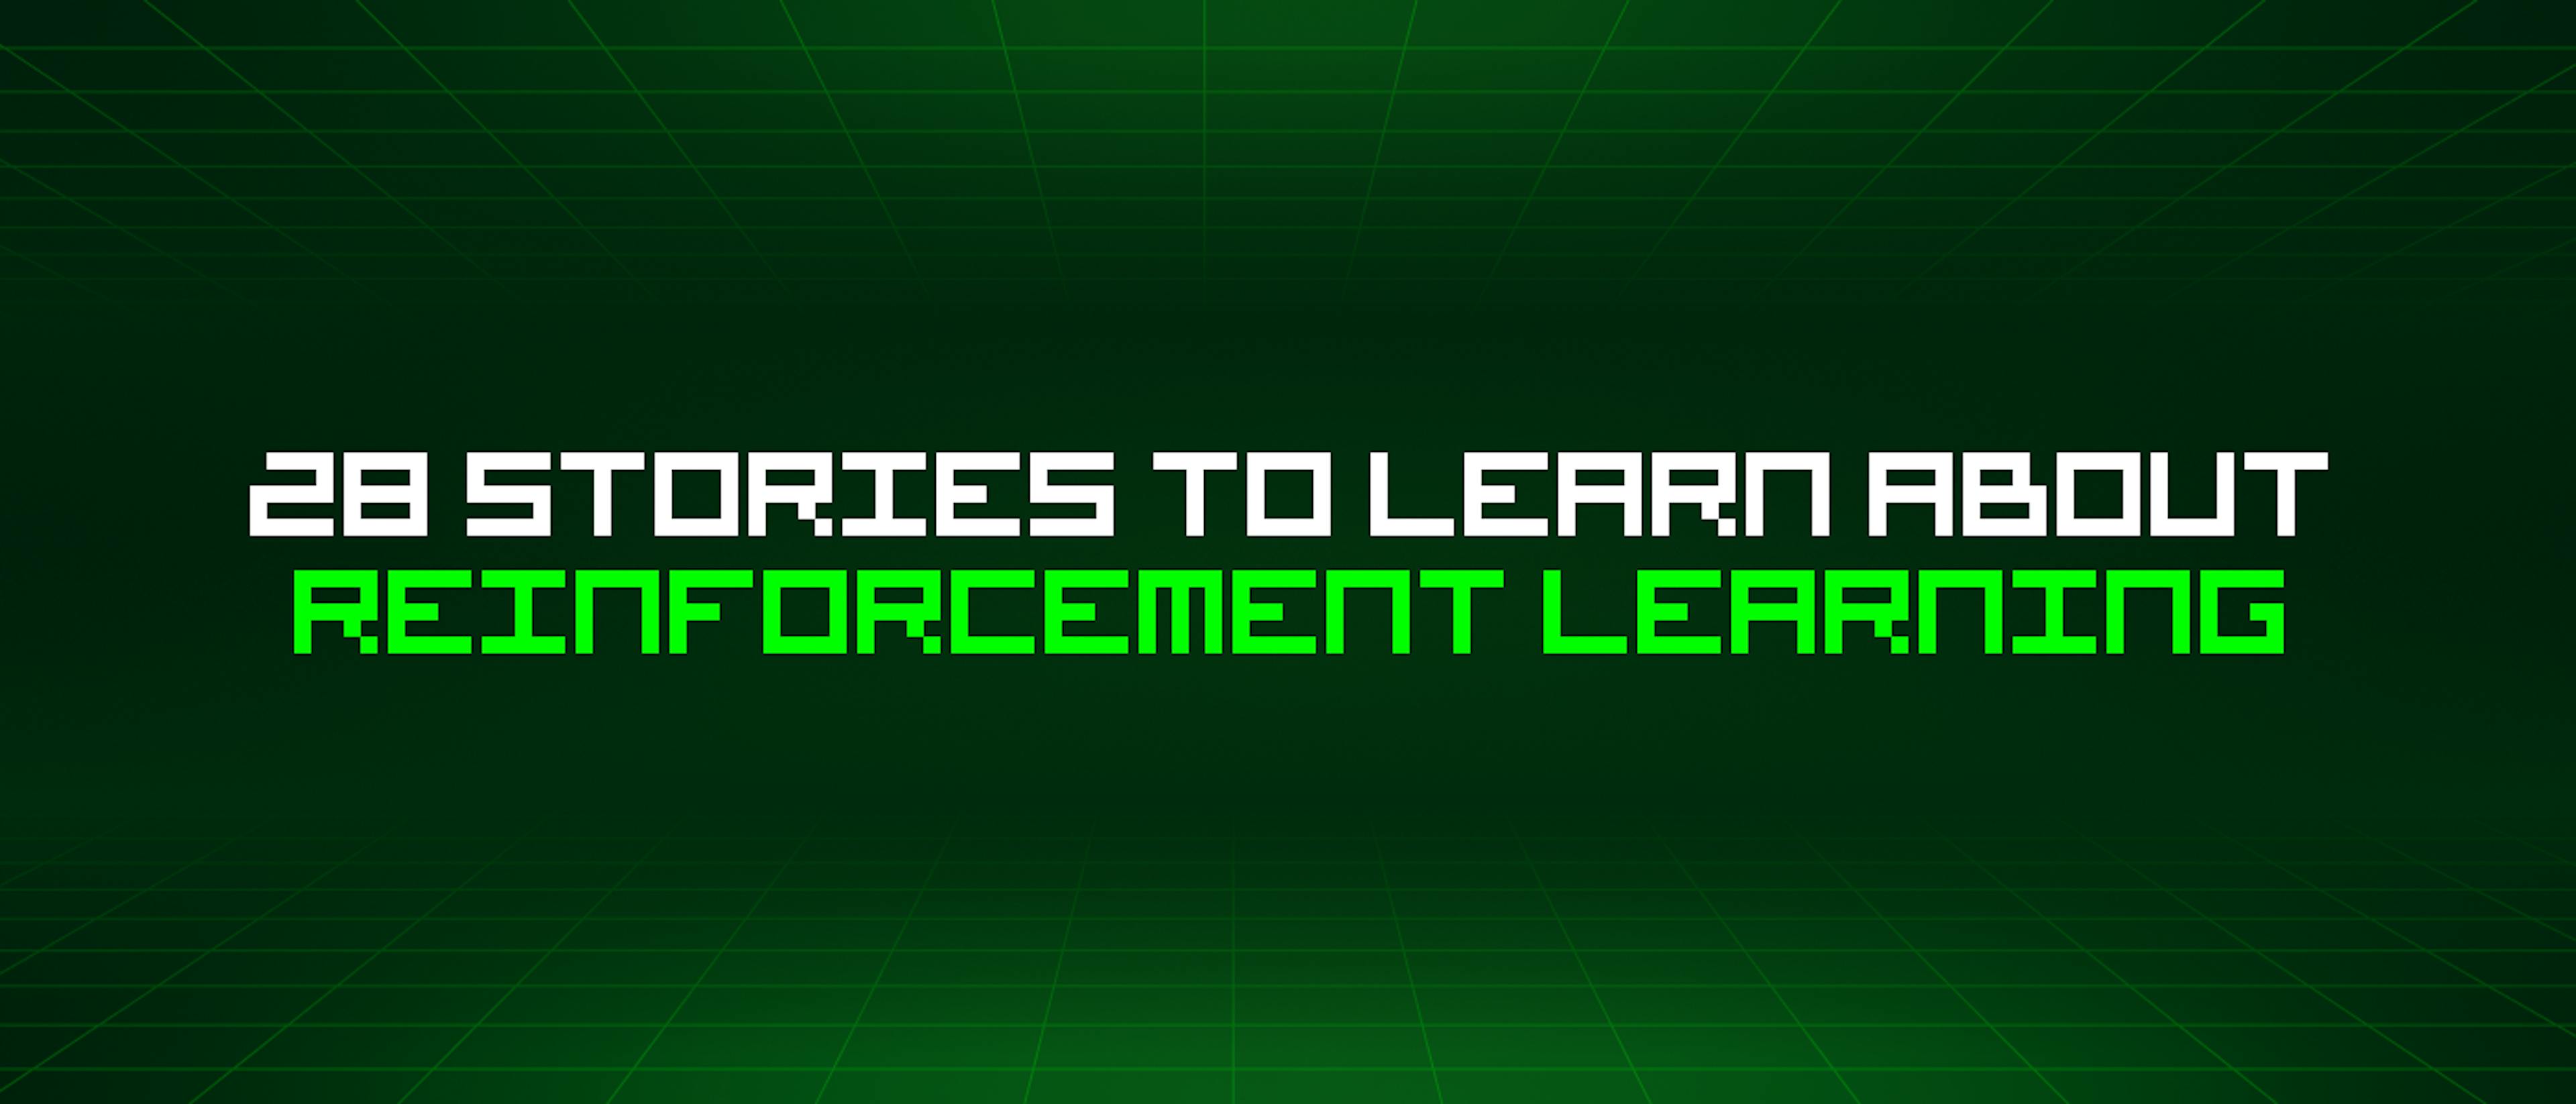 featured image - 28 Stories To Learn About Reinforcement Learning